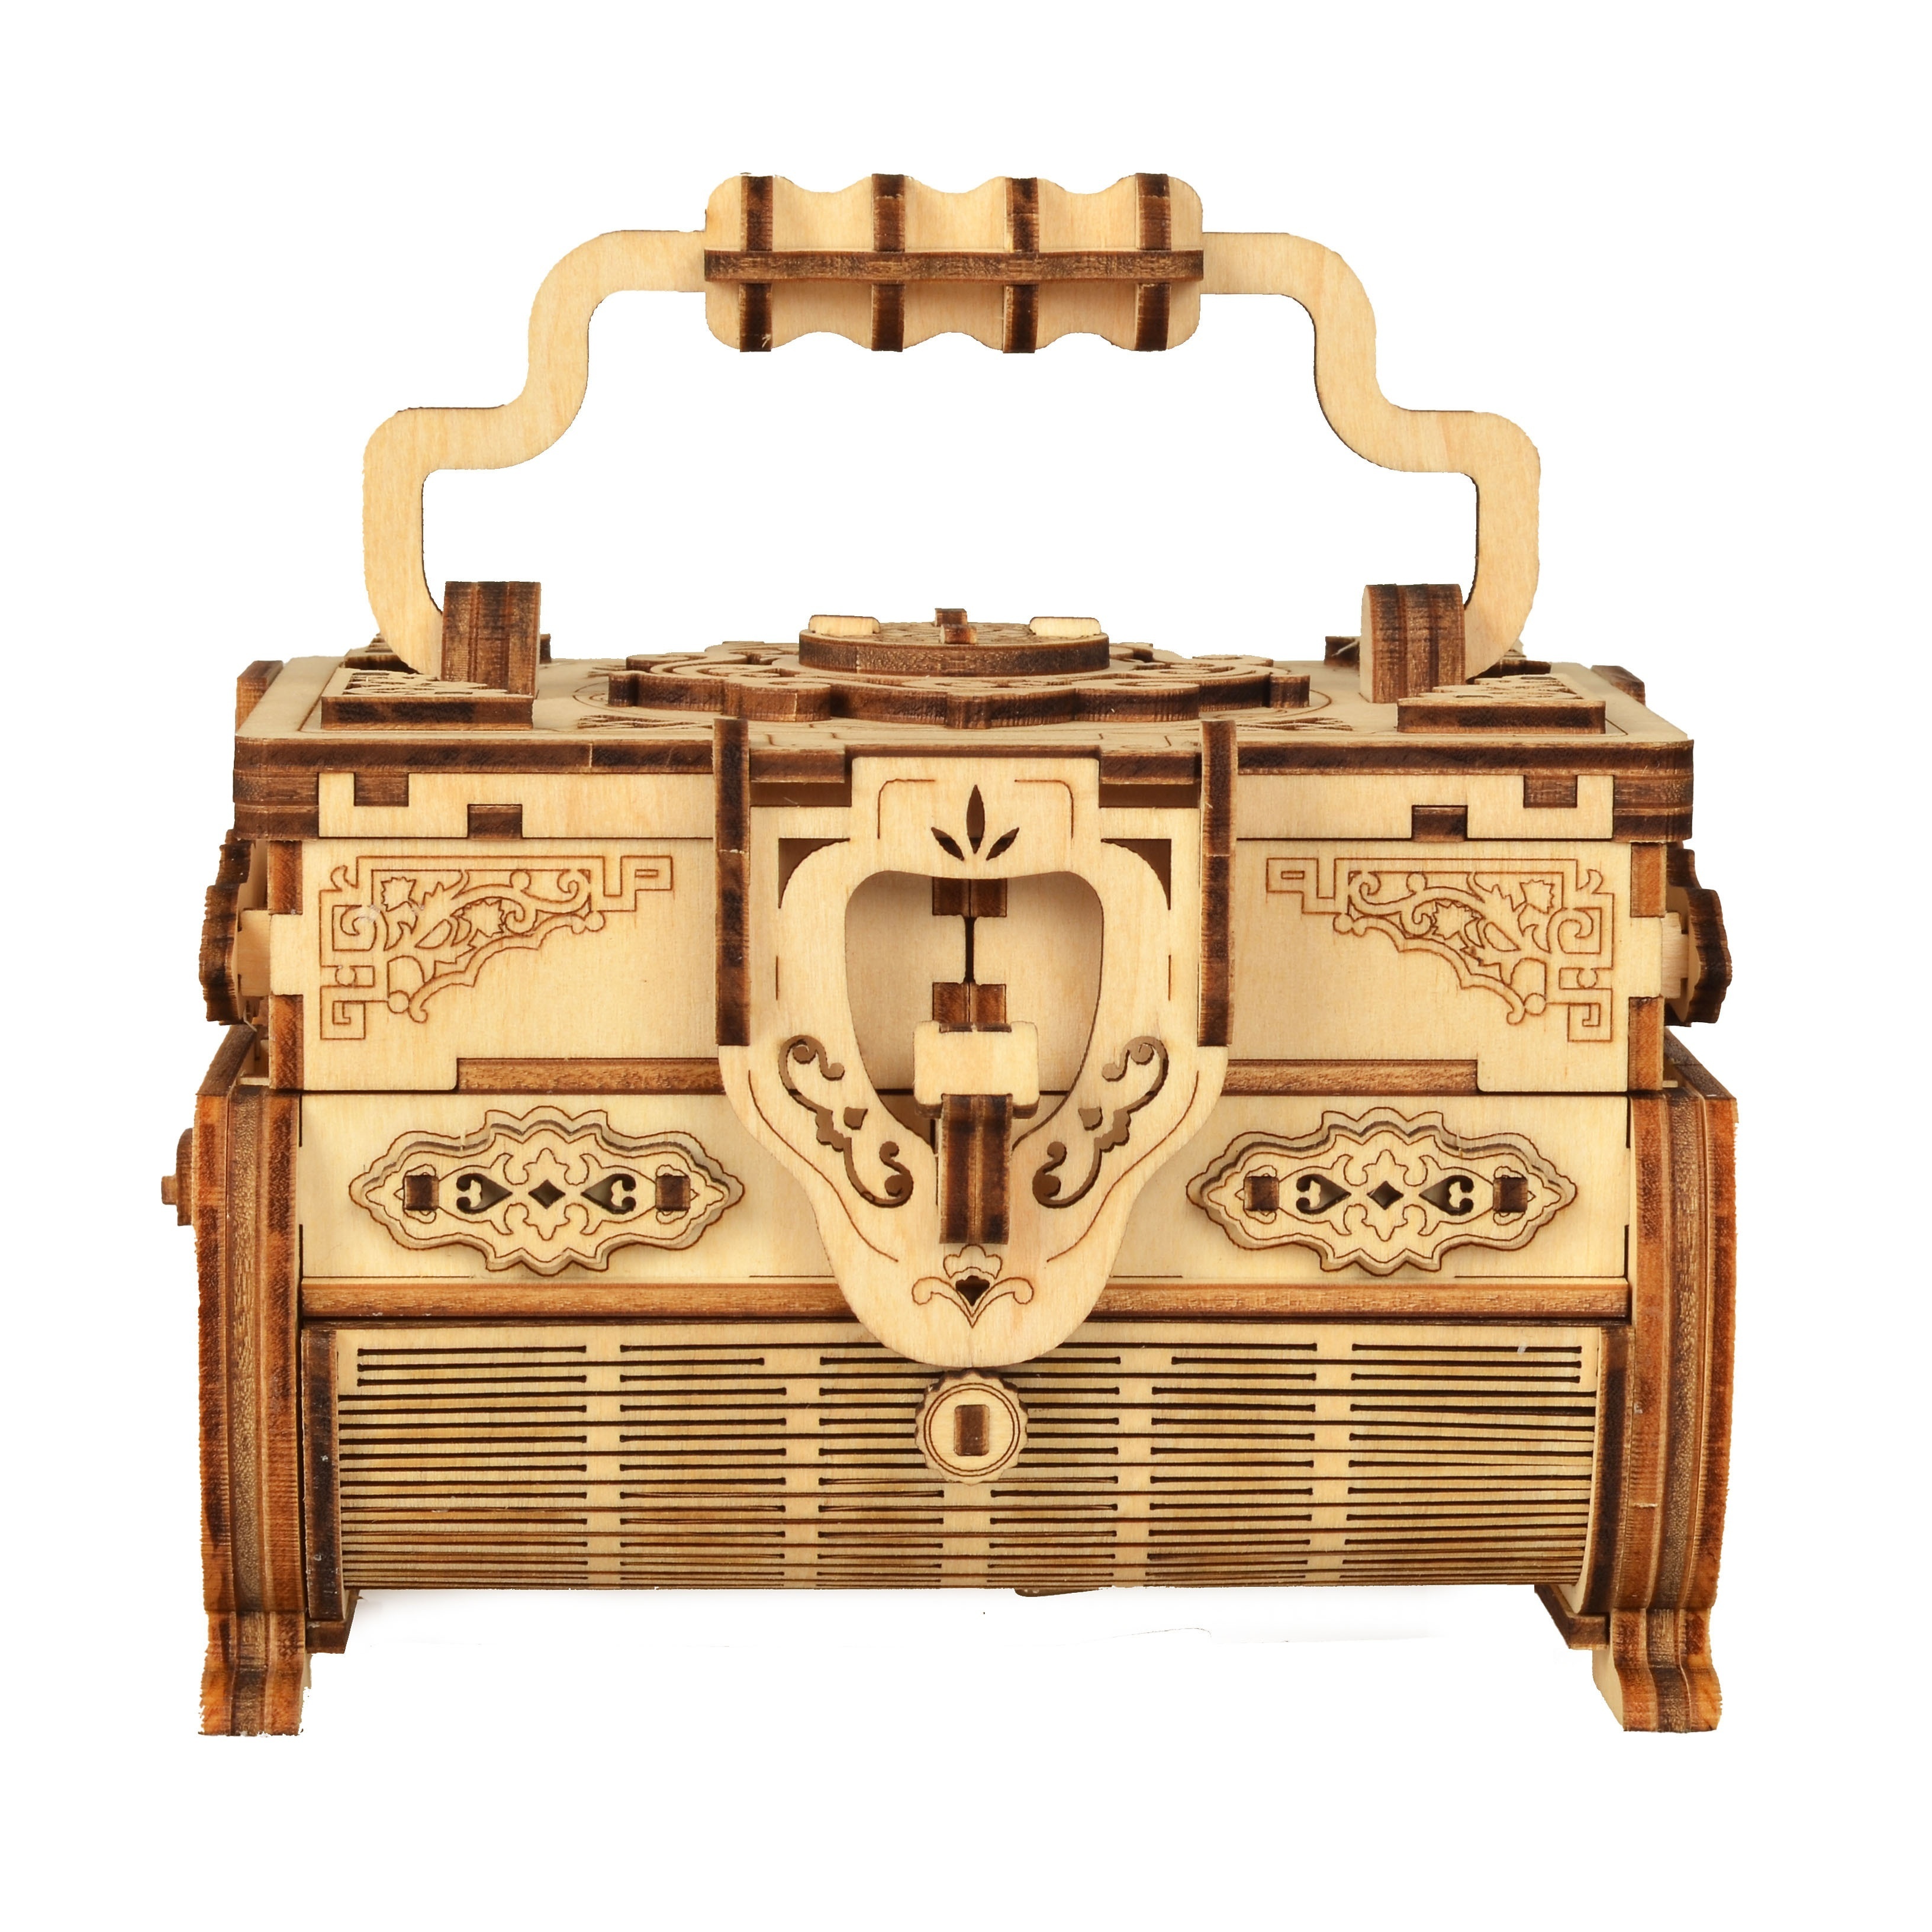 3D Wooden Puzzle Antique Jewel Box, Music Box Kit, DIY Home Decoration,  Laser-Cut Mechanical Model, Stunning Gifts For Adults And Teens.